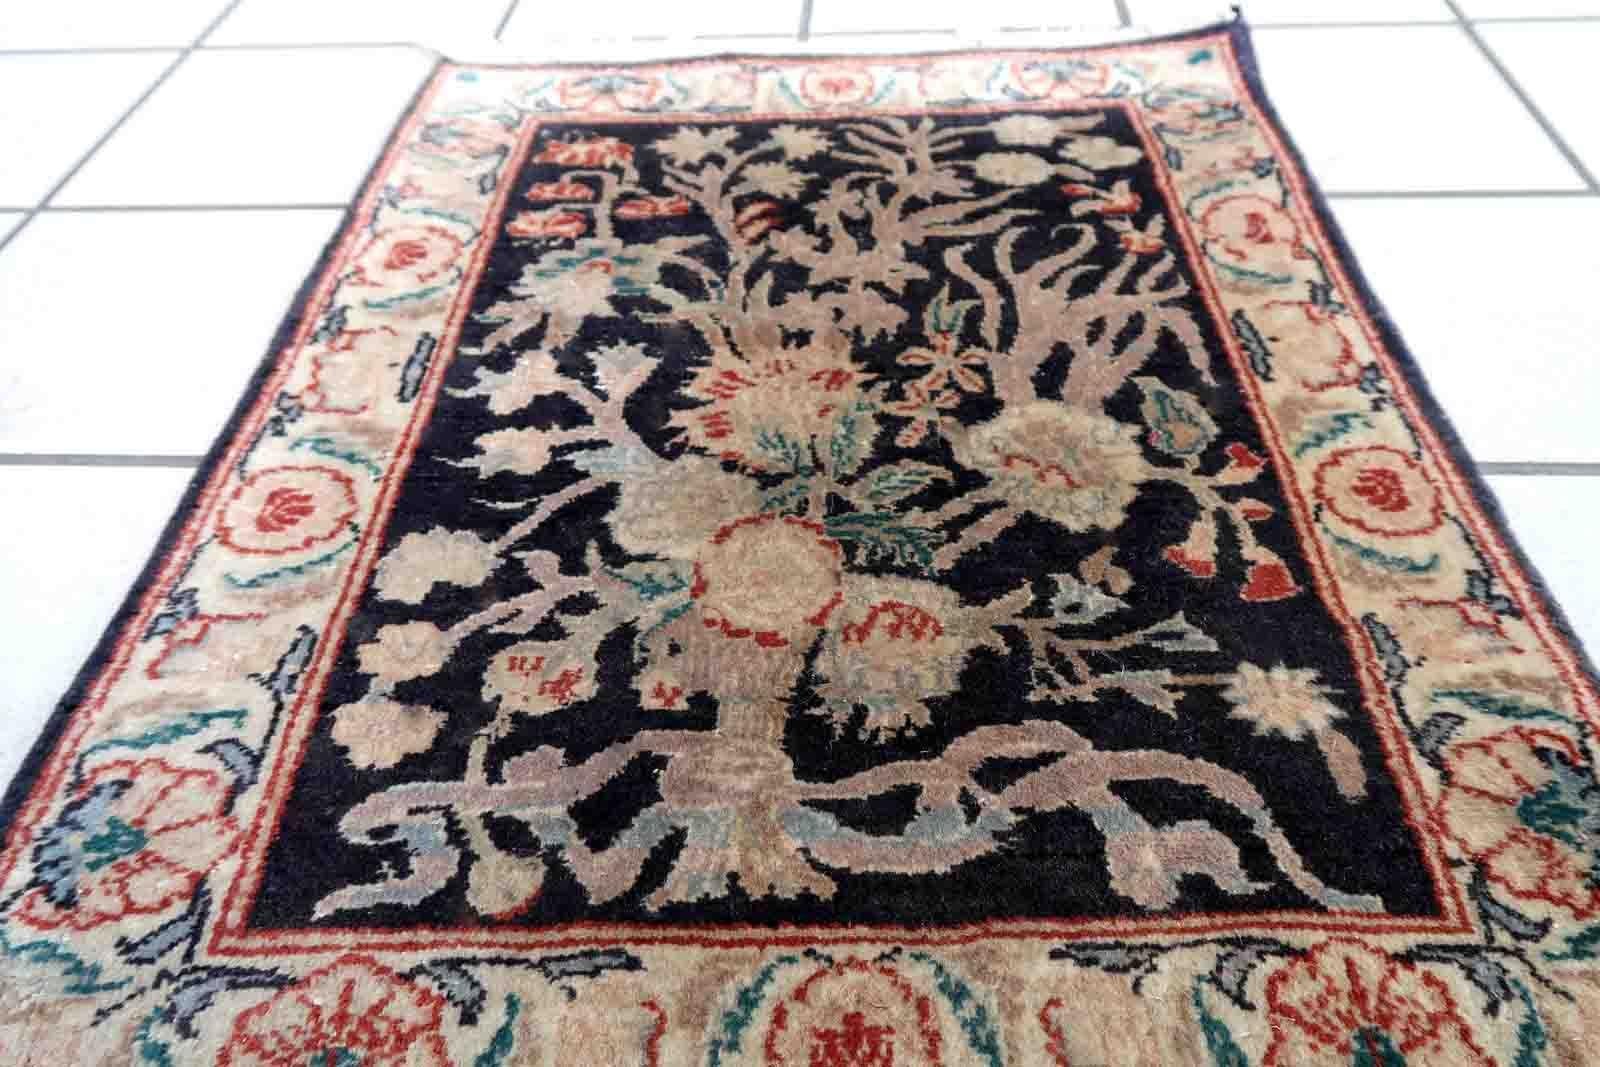 Handmade vintage Tabriz rug in black color and garden design. The rug is from the end of 20th century in original good condition.

-condition: original good,

-circa: 1970s,

-size: 1.5' x 2' (48cm x 64cm),

-material: wool,

-country of